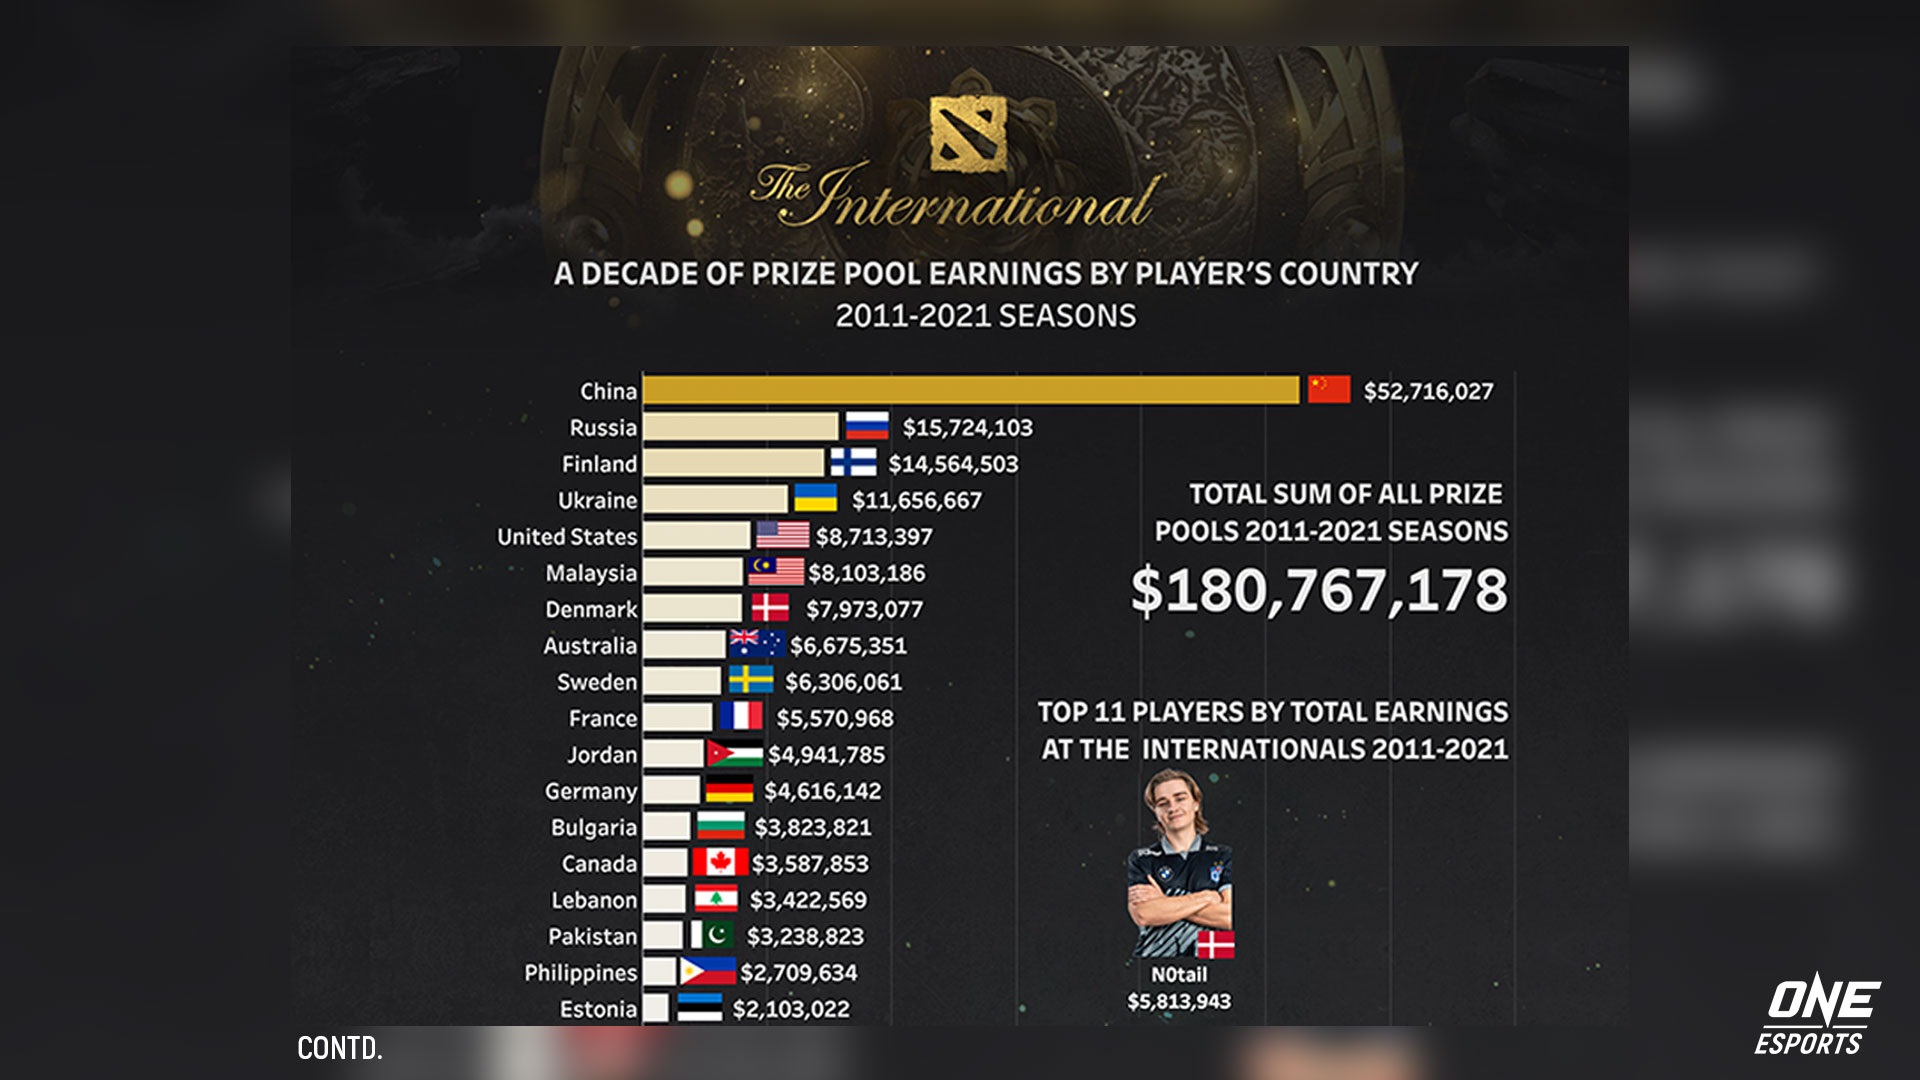 China is number one in TI prize pool earnings, three times more than